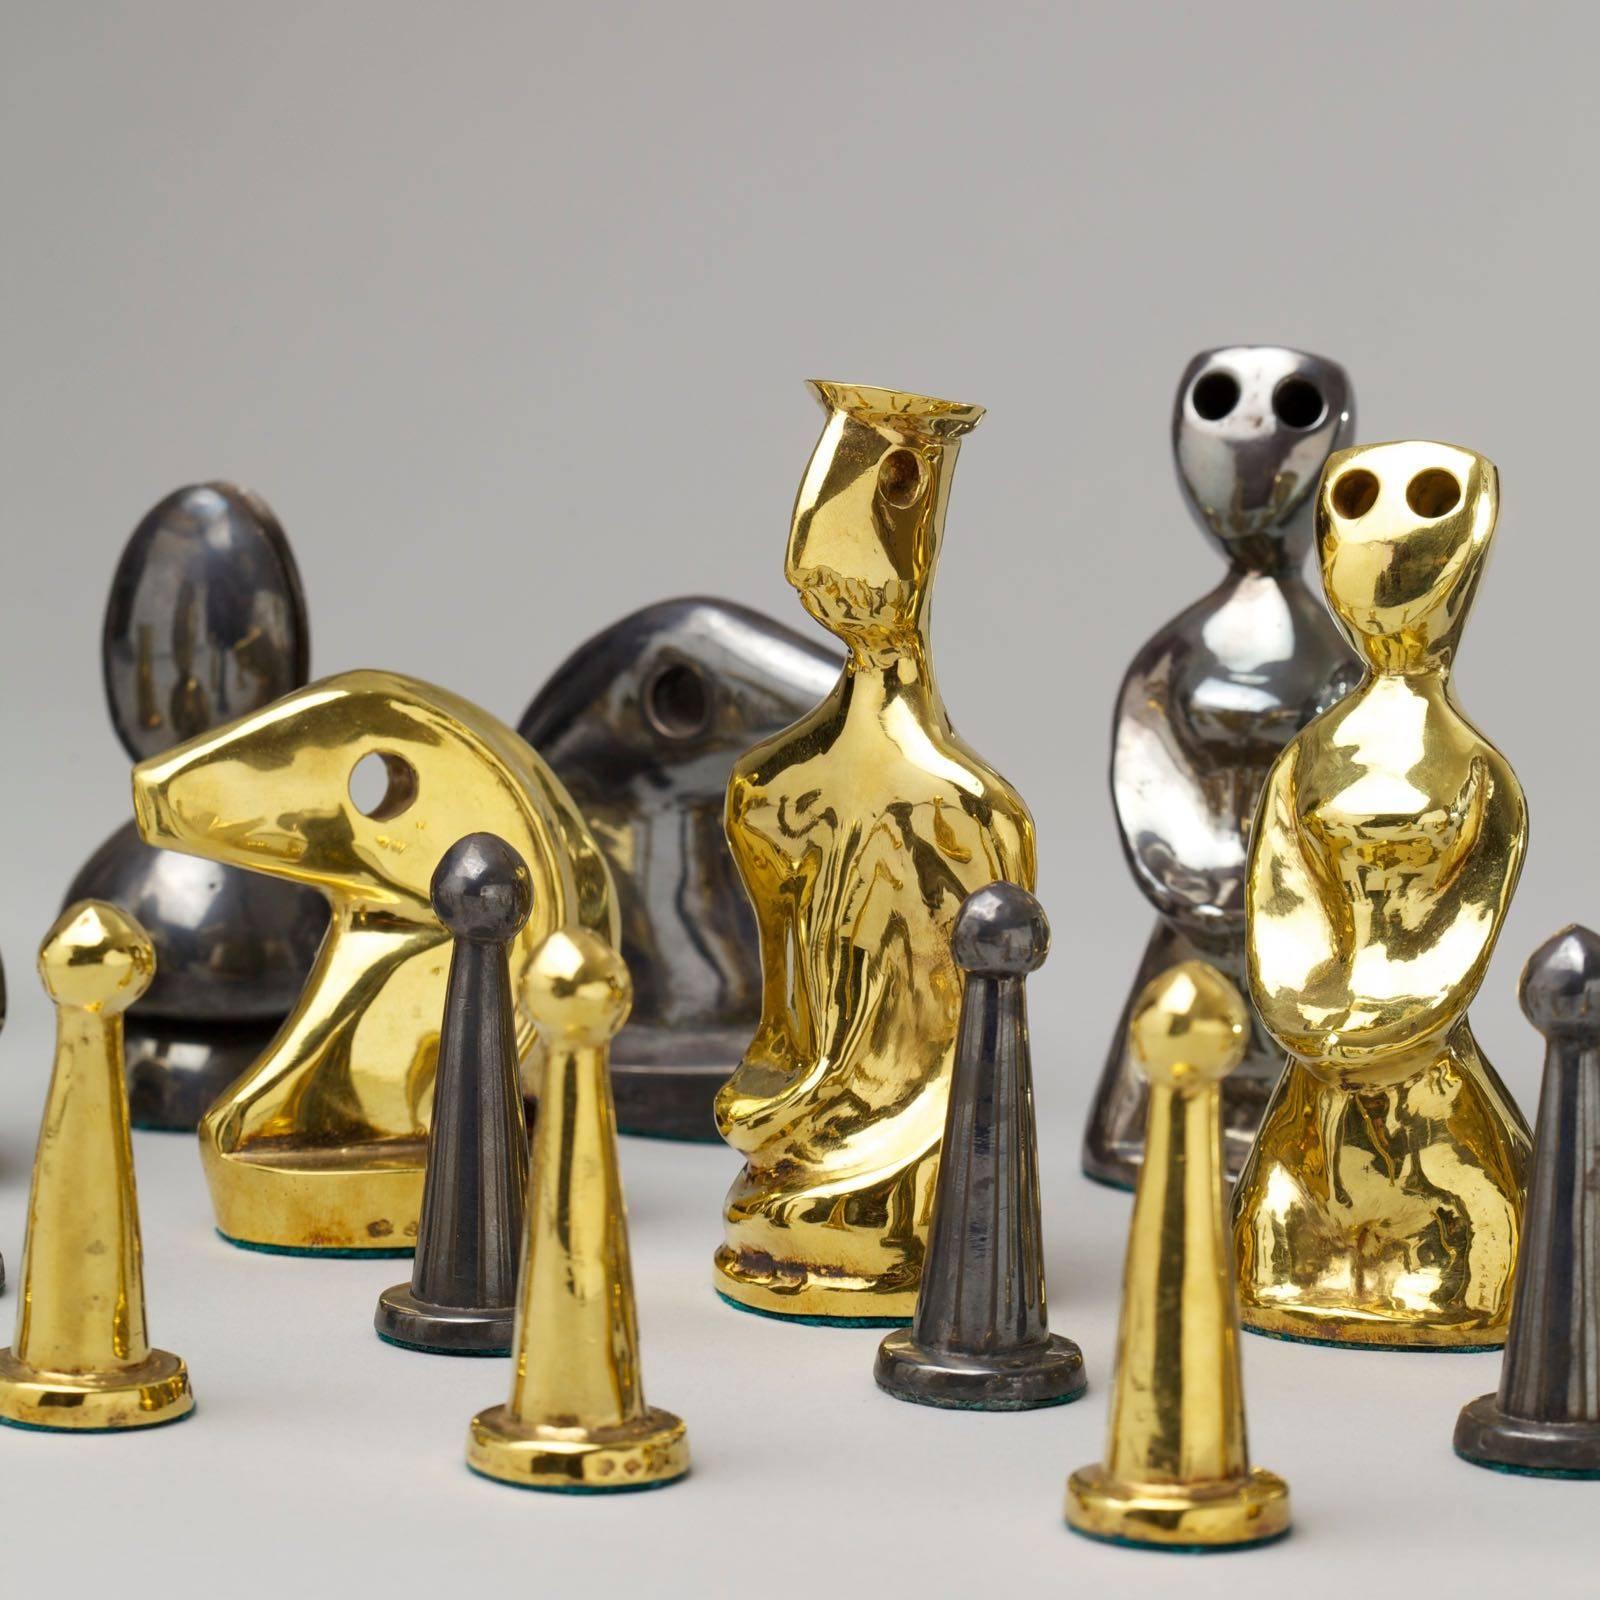 This chess set was designed by Max Ernst and executed by Pierre Hugo, goldsmith in Aix-en-Provence (France) in 23 carat gold and oxidized 990 silver. The gold weight 1051 grams and the silver weight 778 grams. Each piece was entirely made by hand.